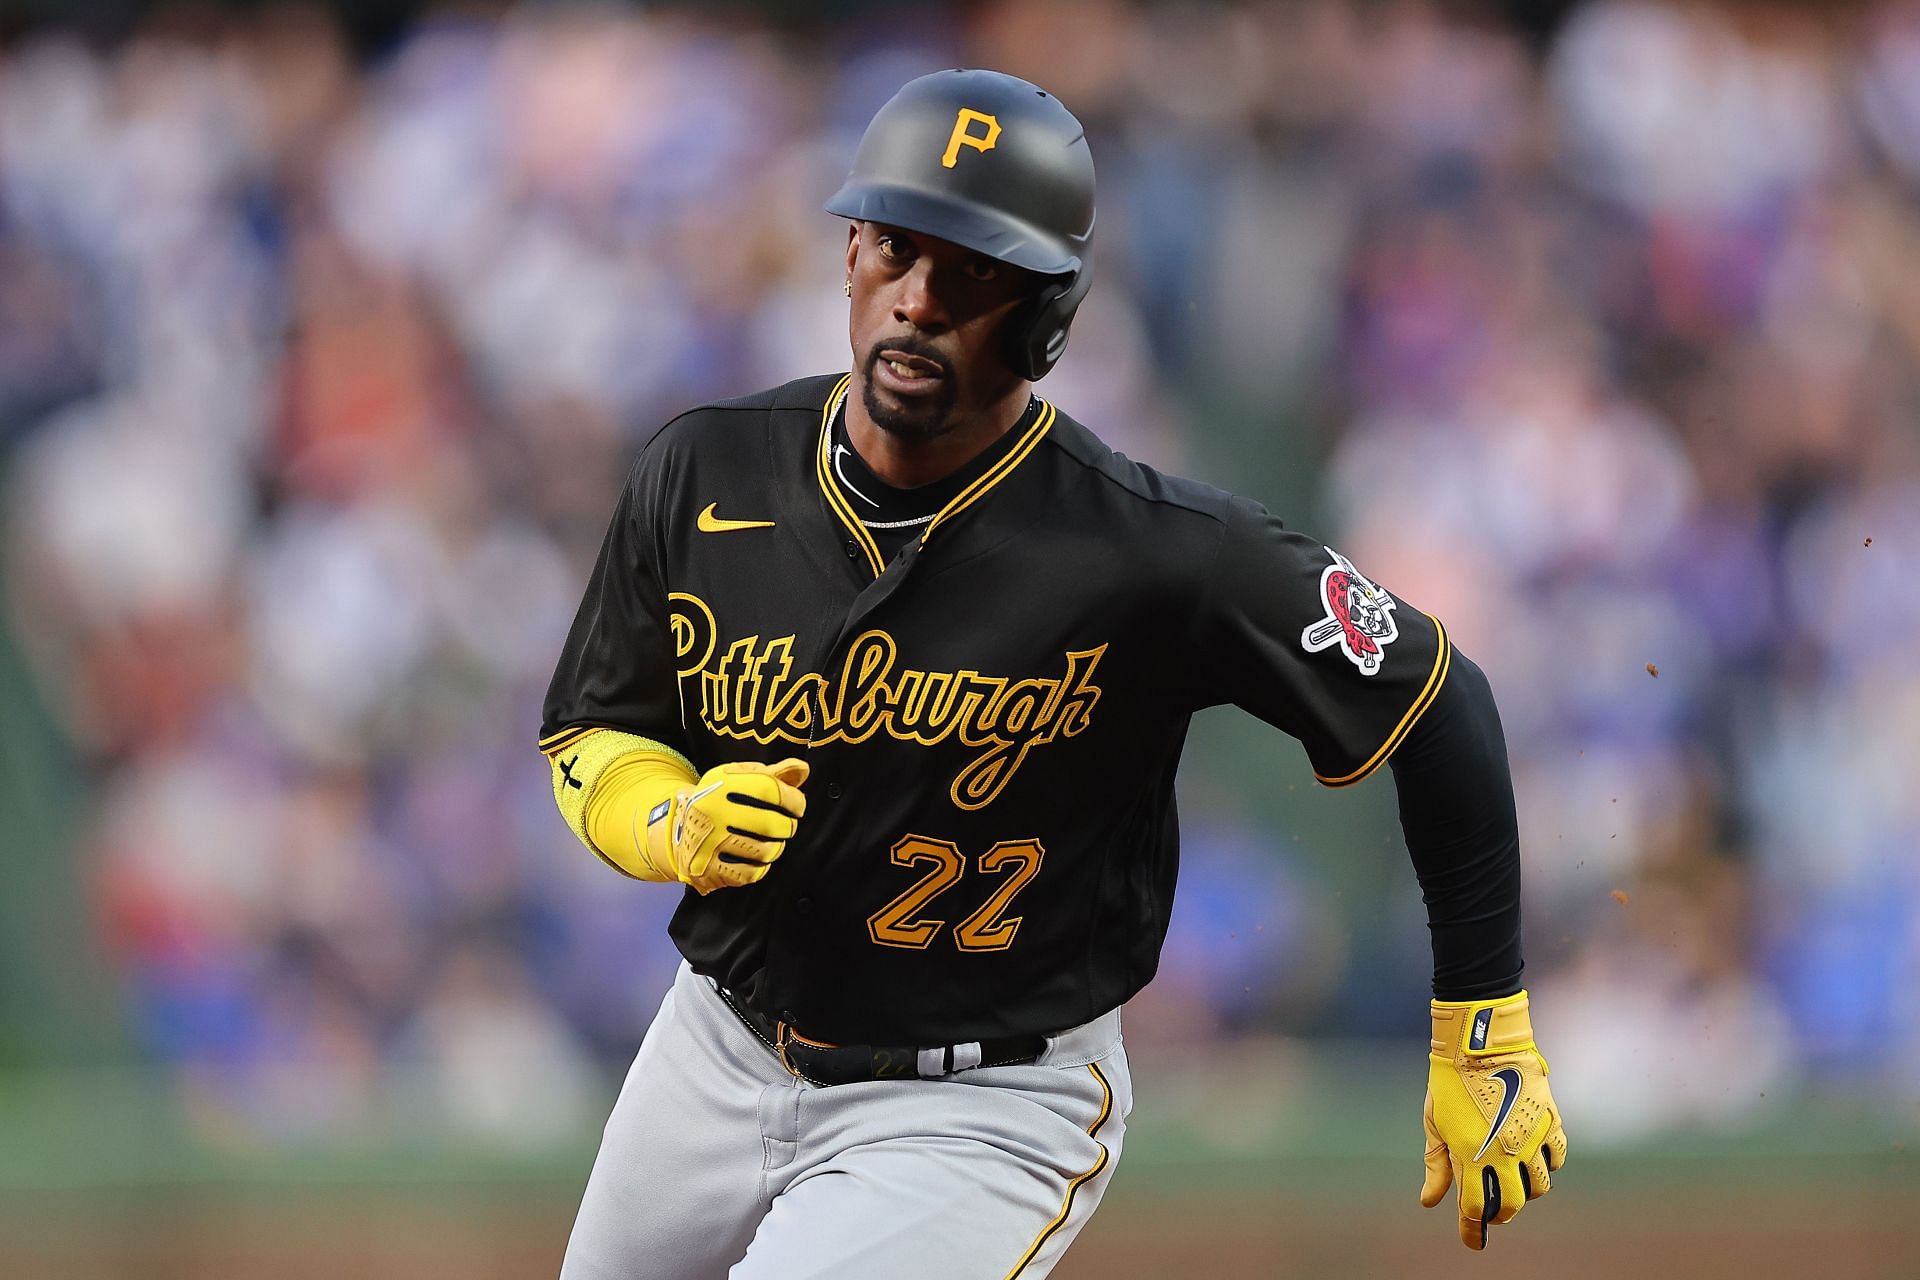 Andrew McCutchen does not qualify for the grid today